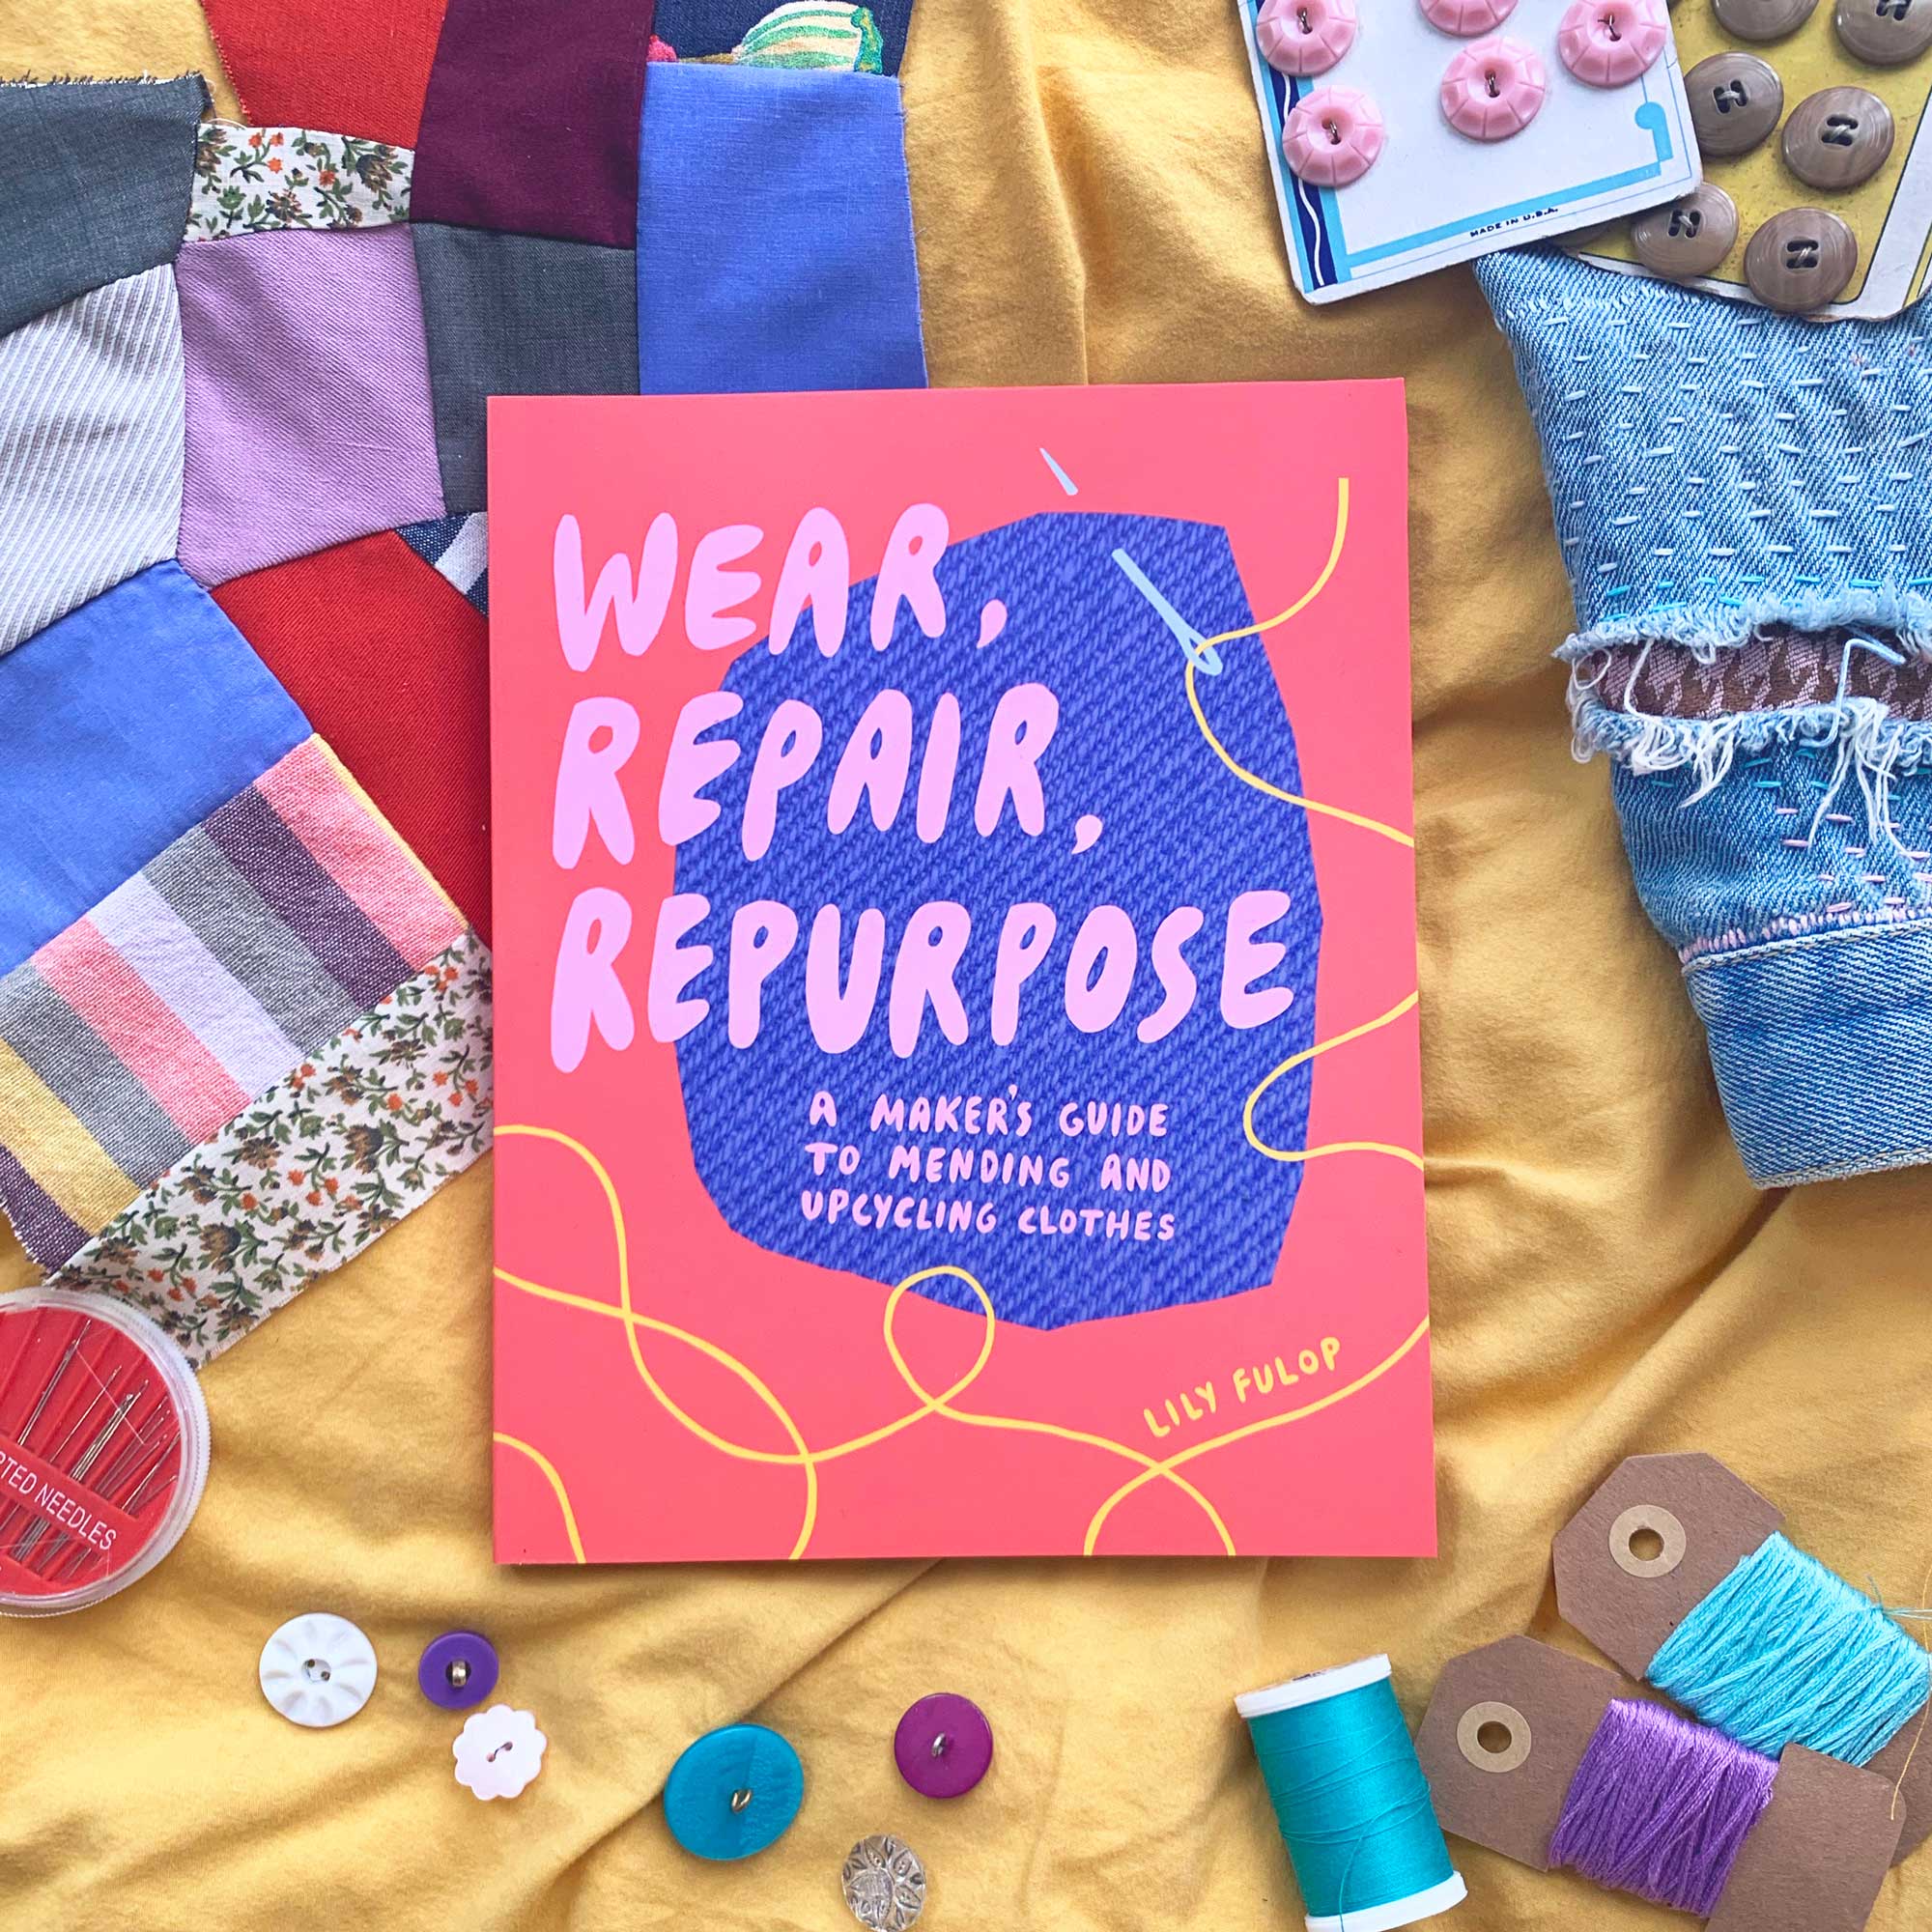 Wear Repair Restore by Lily Fulop